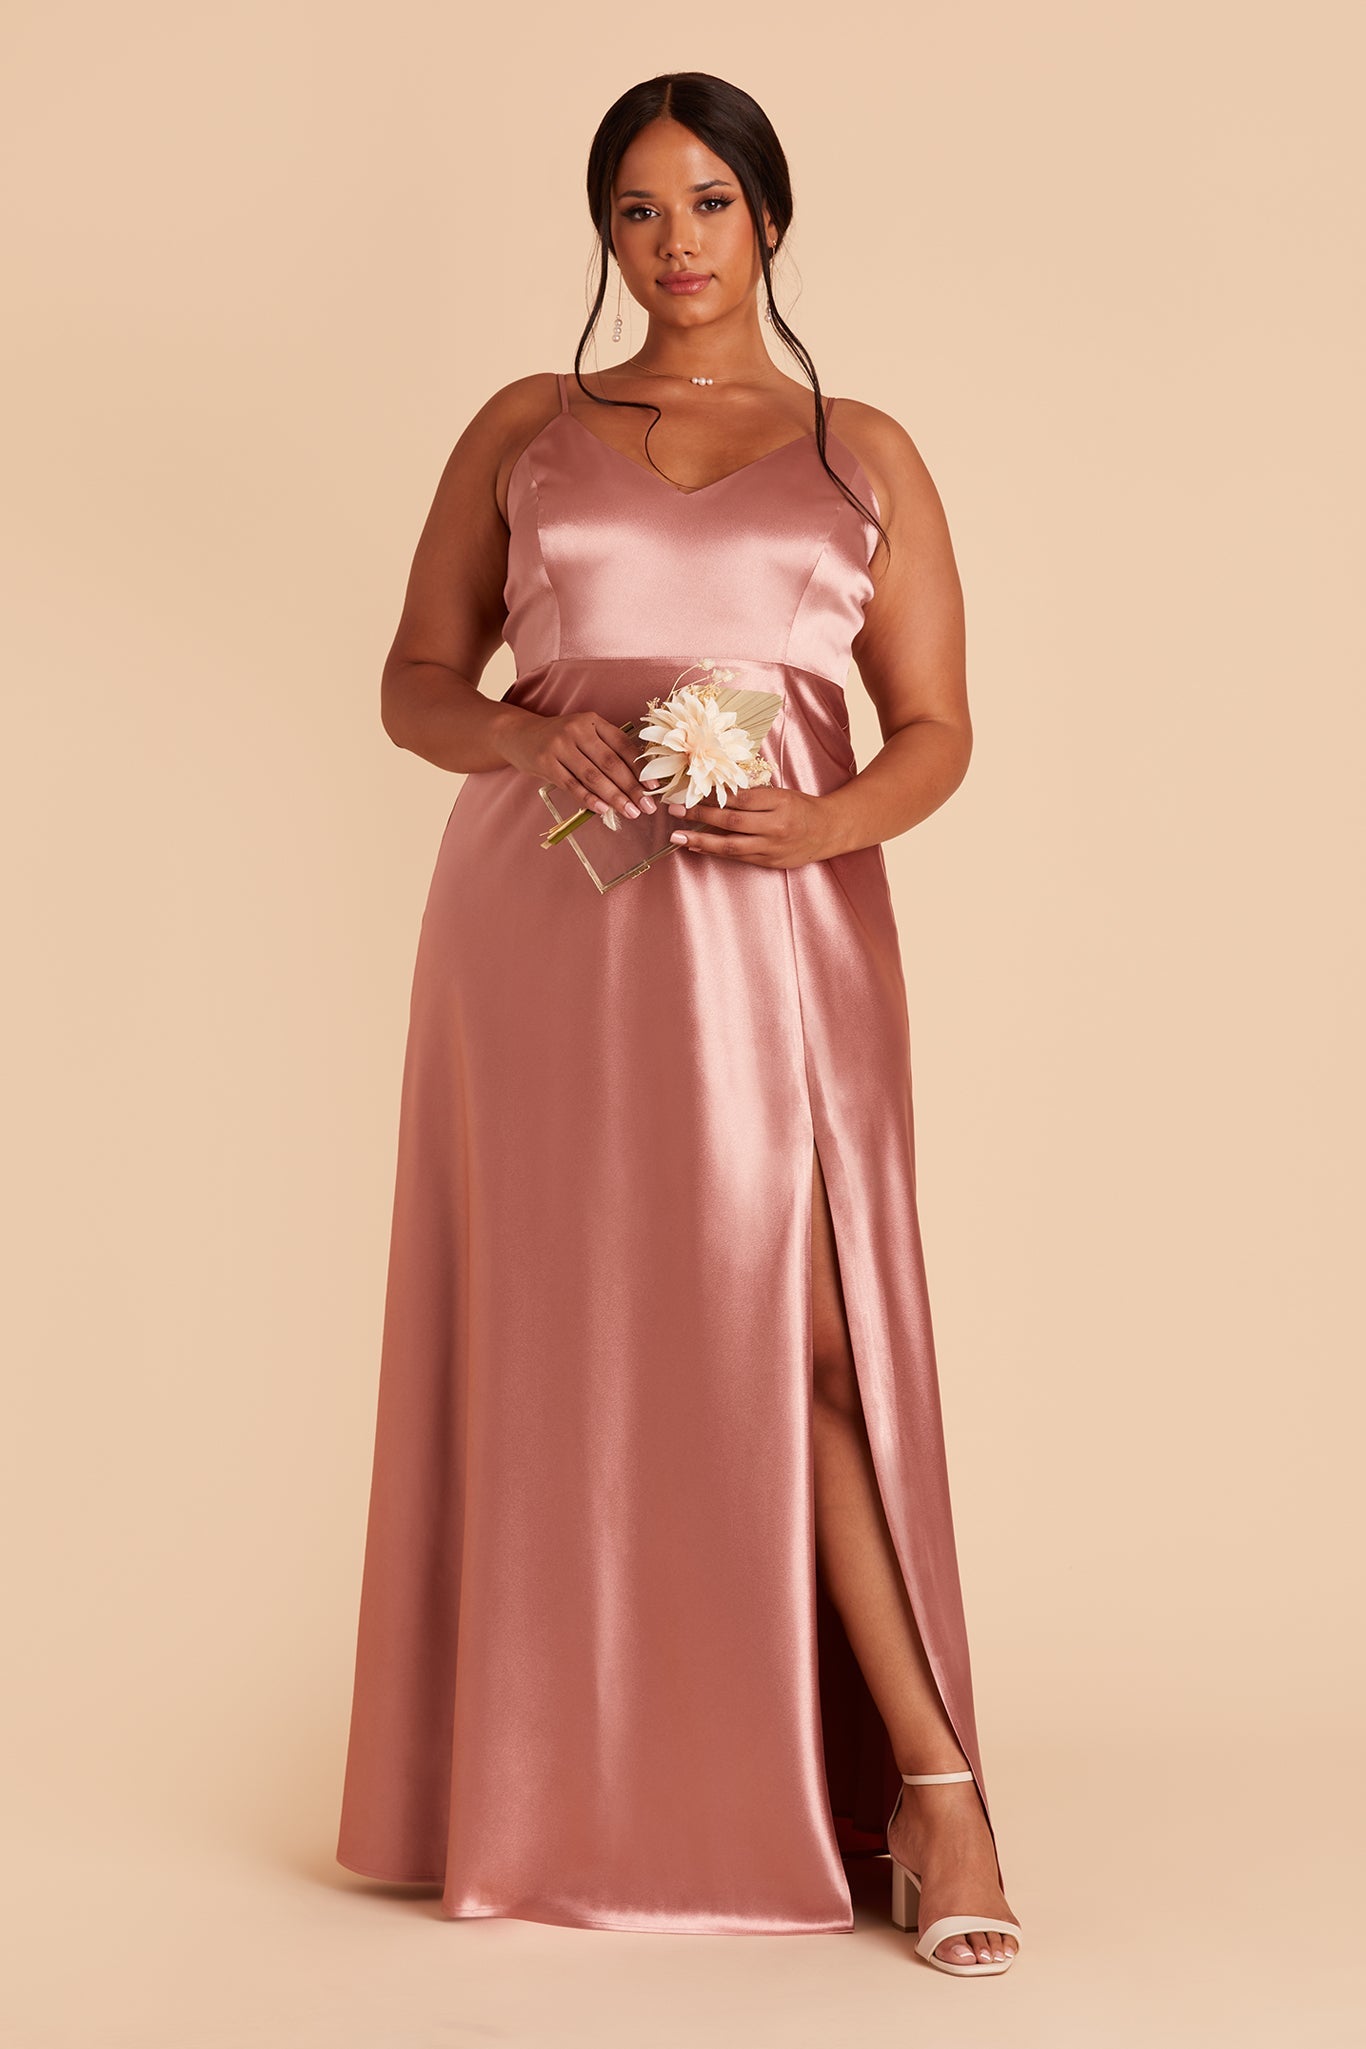 Jay plus size bridesmaid dress with slit in desert rose satin by Birdy Grey, front view